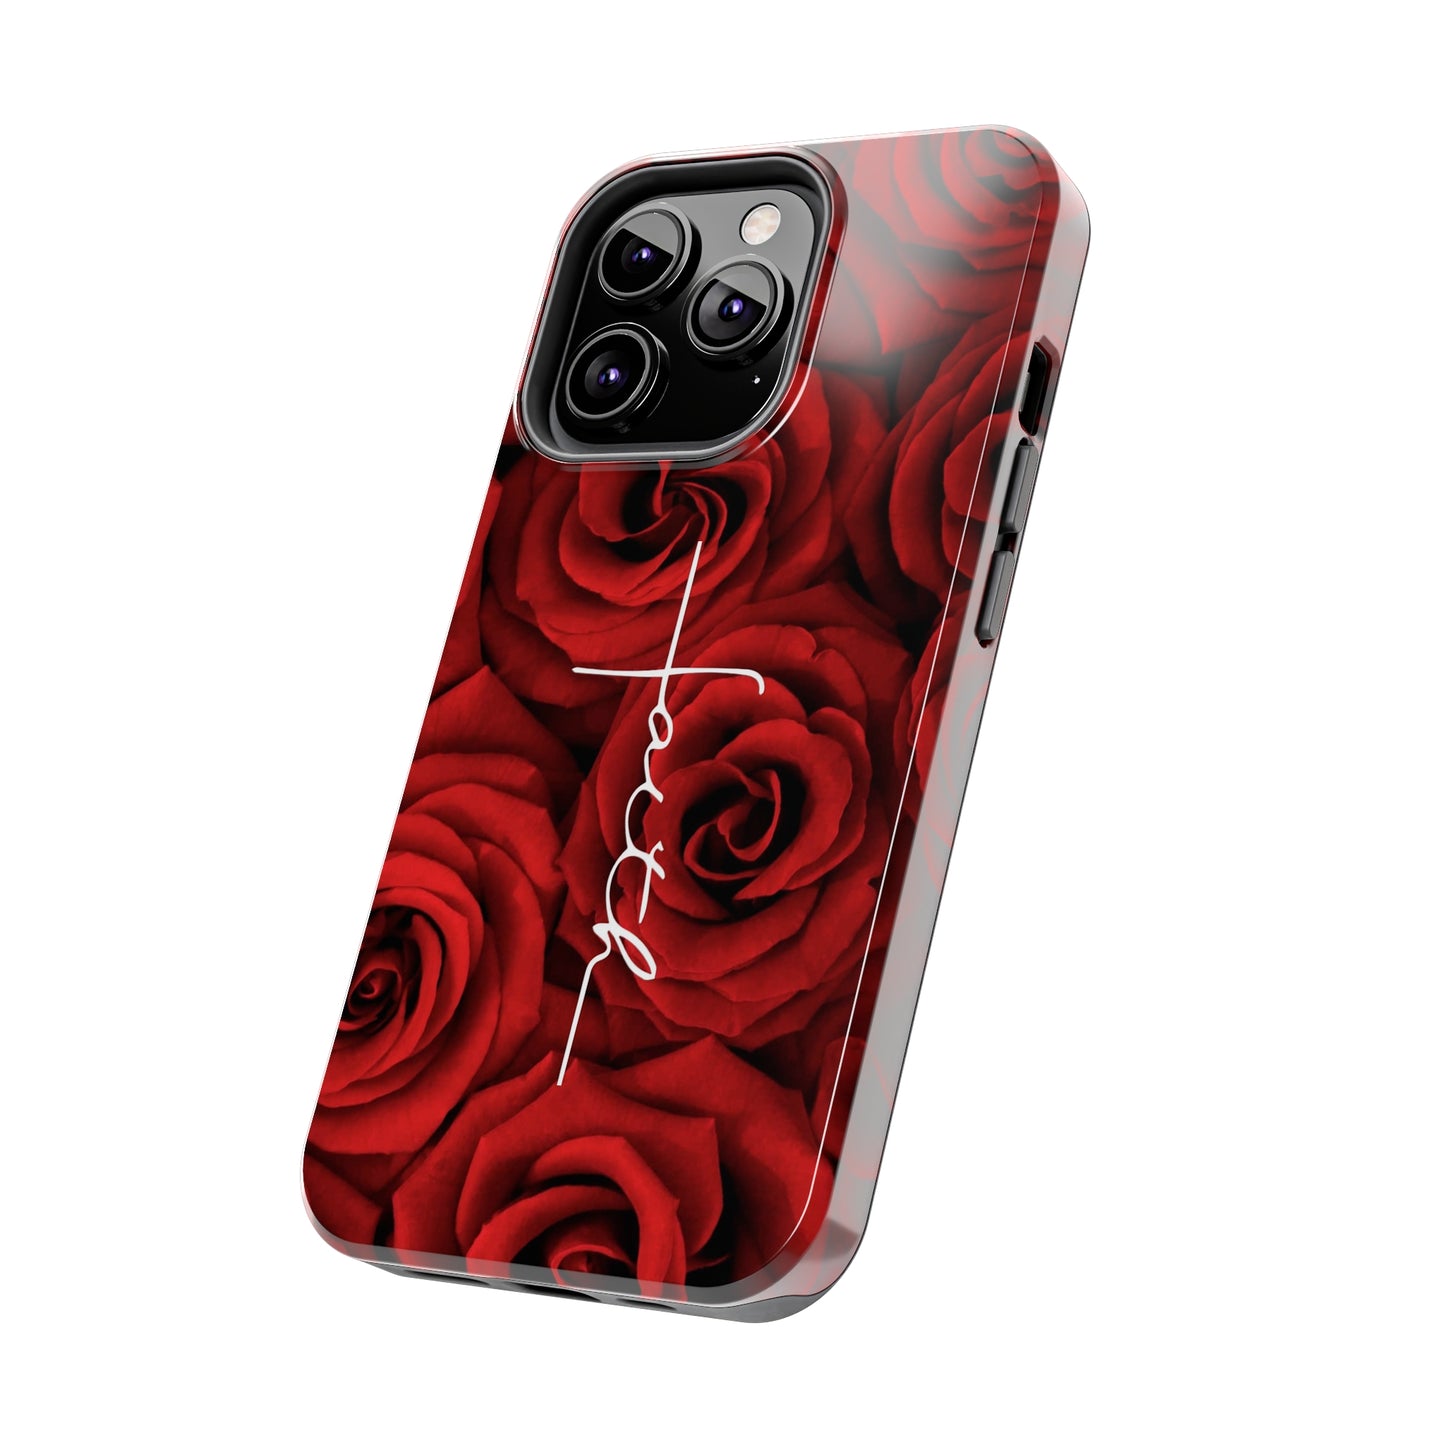 "Roses and faith" iPhone Case